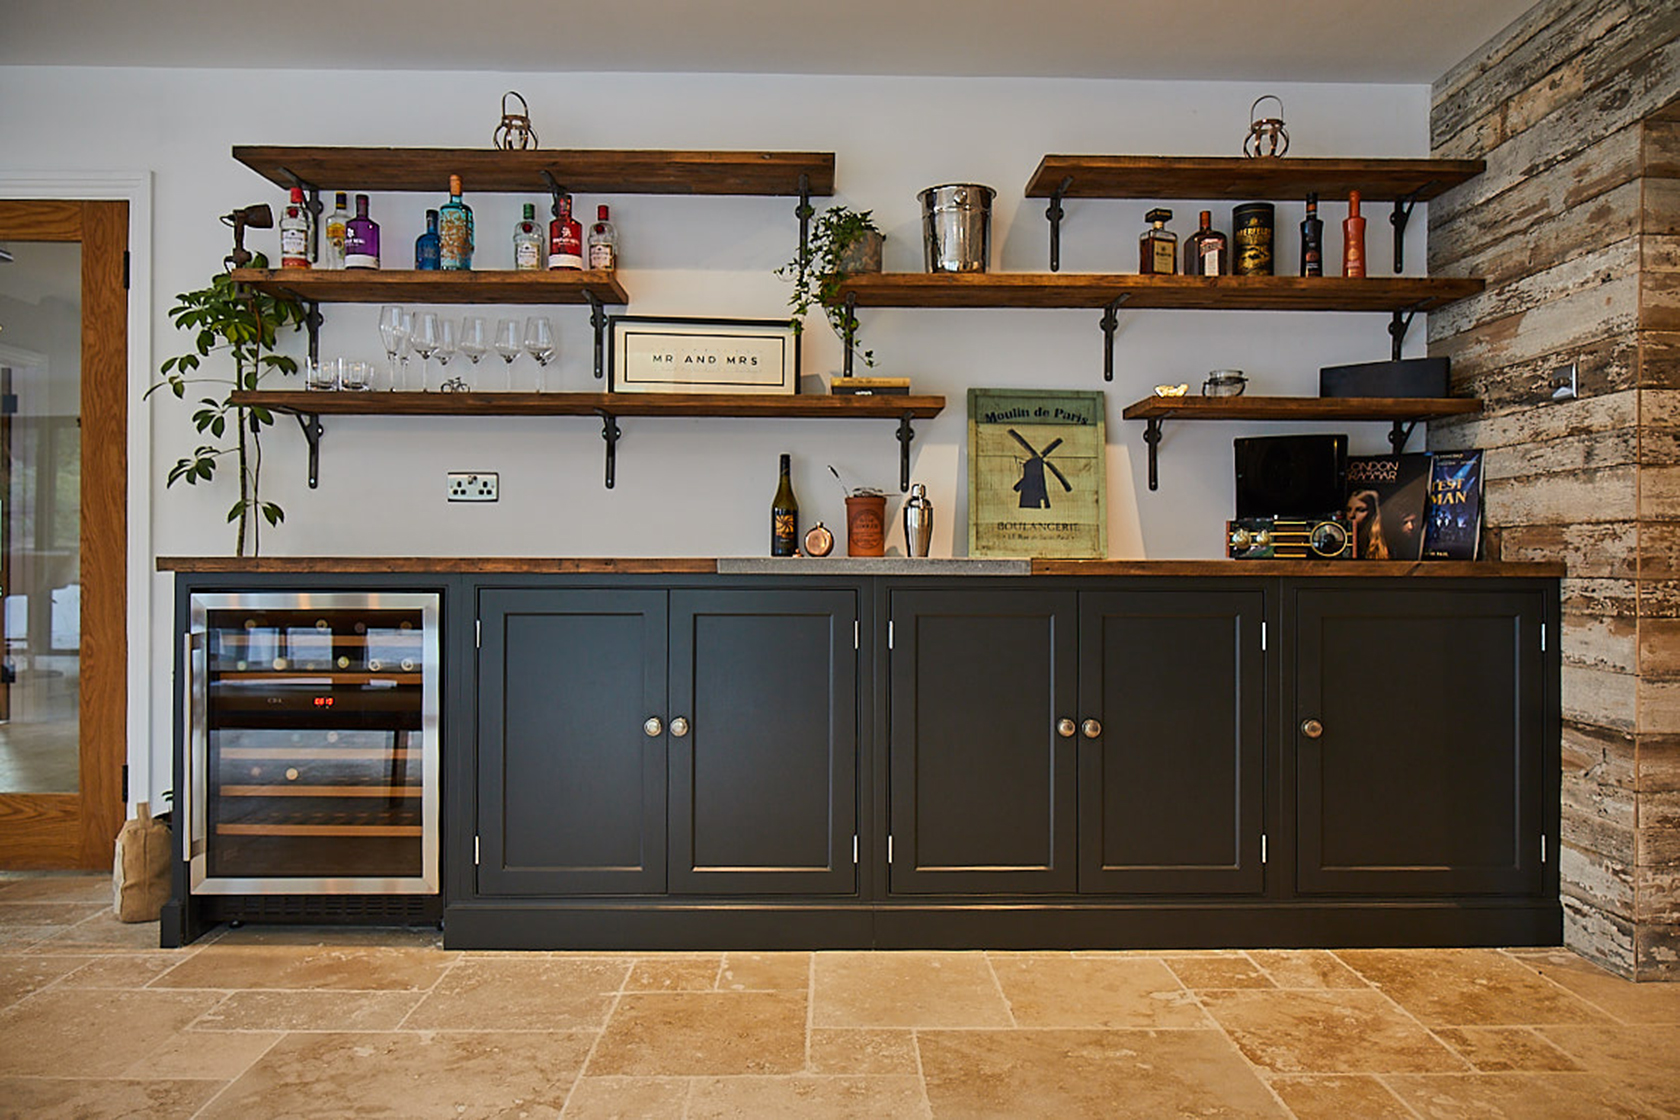 Bespoke painted units in lamp black with integrated wine cooler and open shelves above